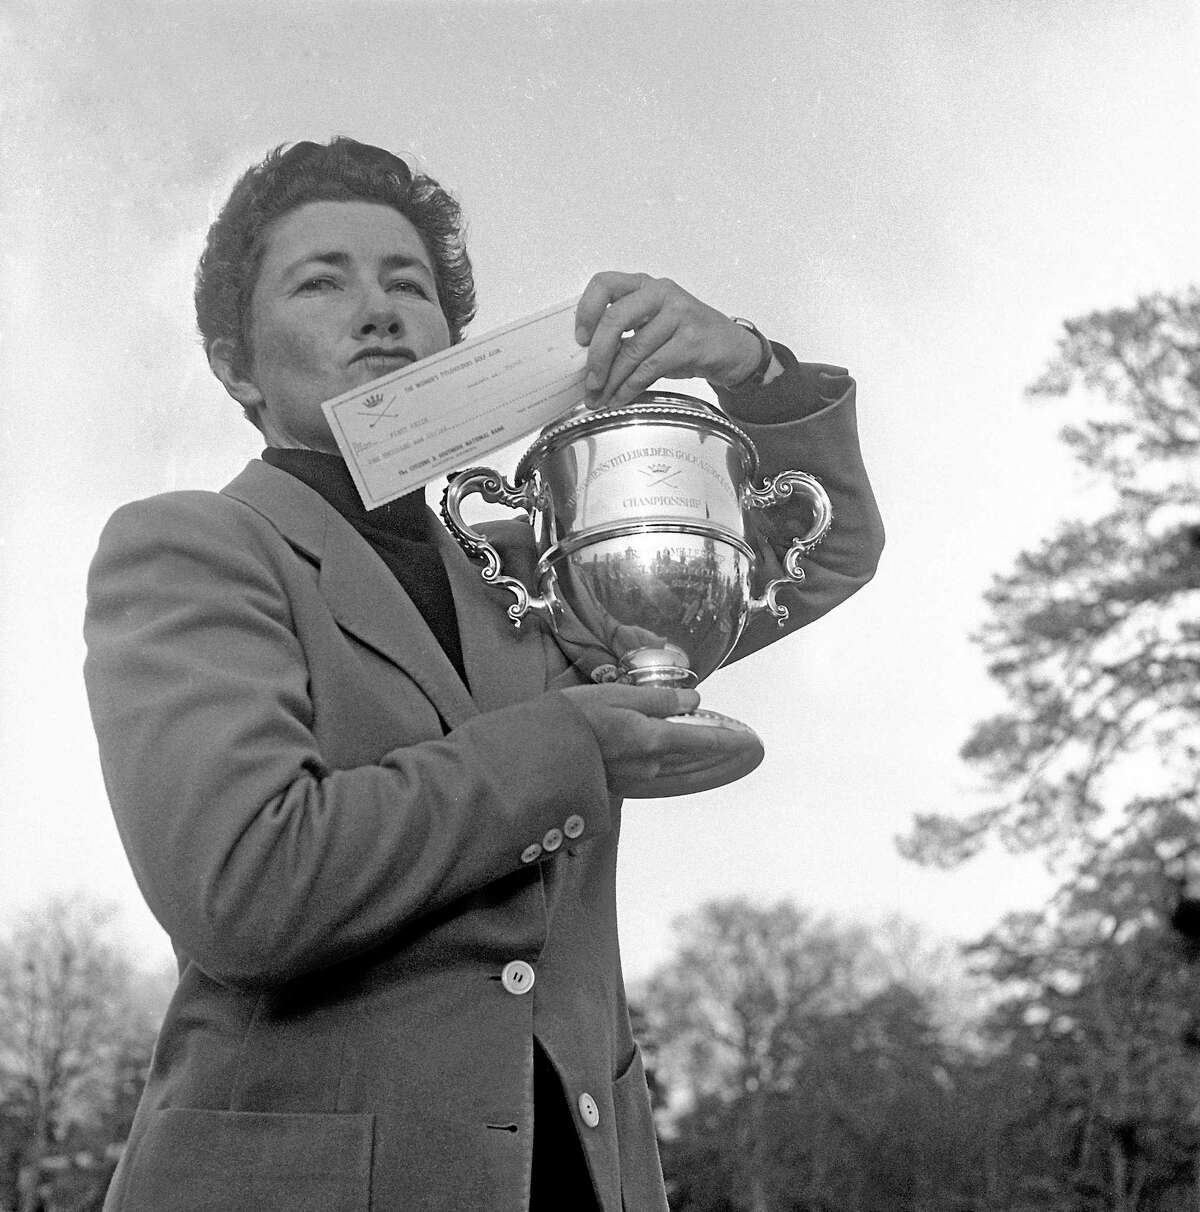 Louise Suggs holds up the winner’s cup and a check for $1,000 after winning the Women’s Titleholders championship in 1959 in Augusta, Ga.